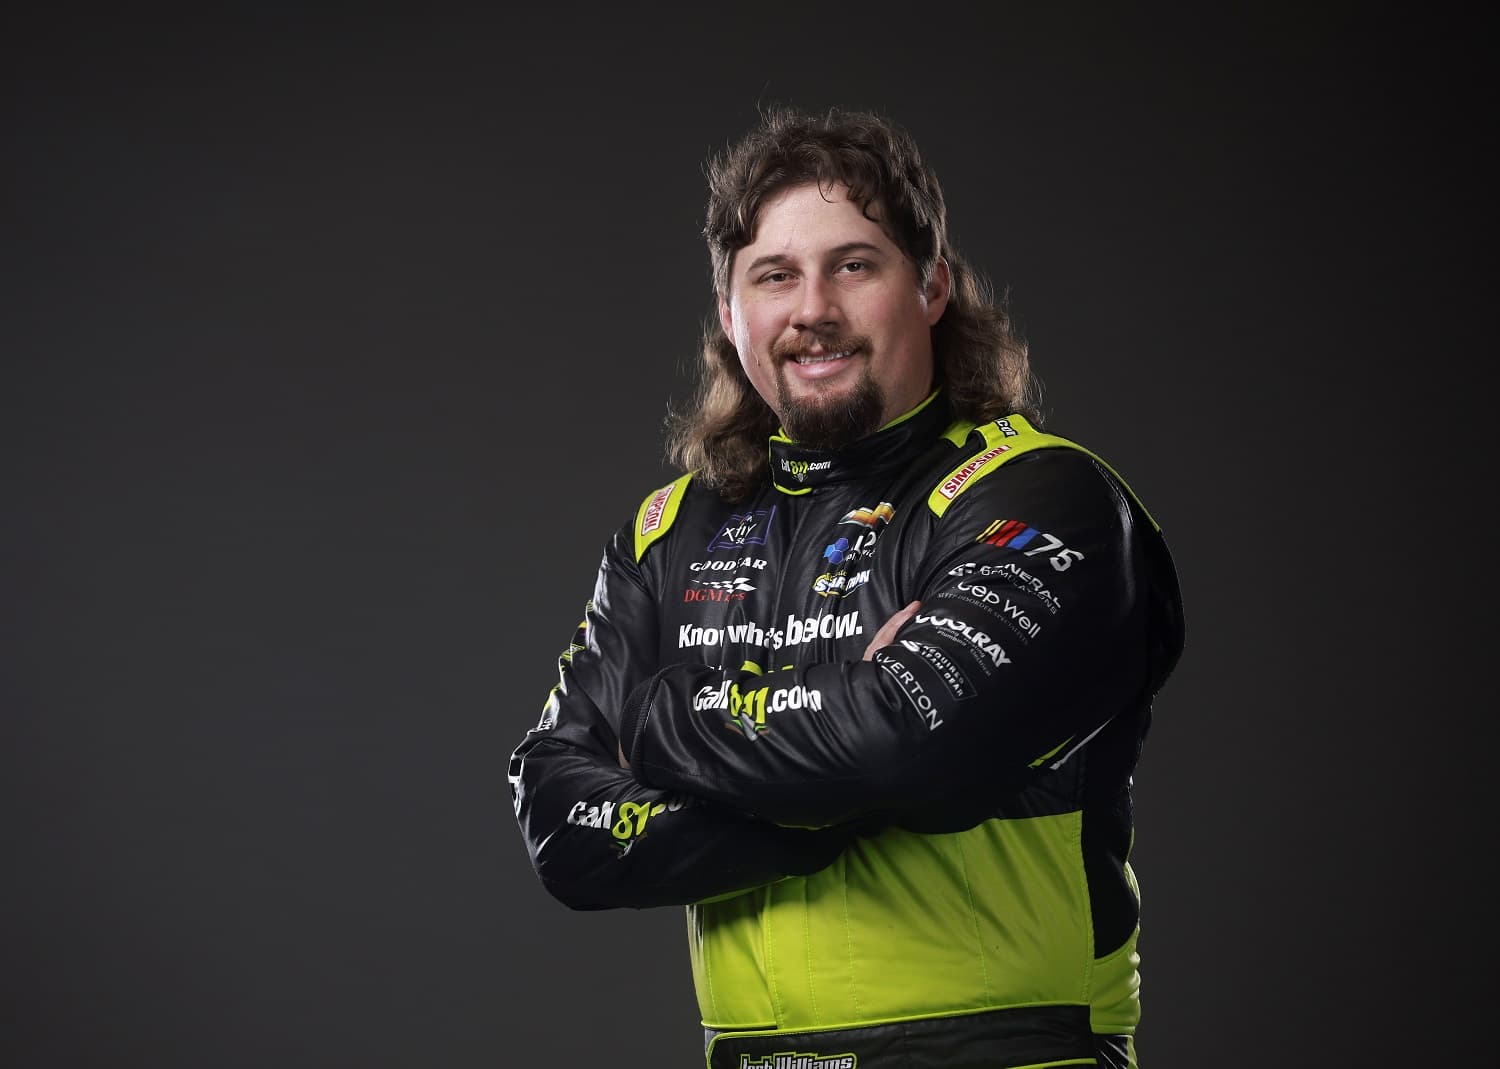 Driver Josh Williams poses for a photo during NASCAR Production Days at Charlotte Convention Center on Jan. 19, 2023 in Charlotte, North Carolina. |  Jared C. Tilton/Getty Images